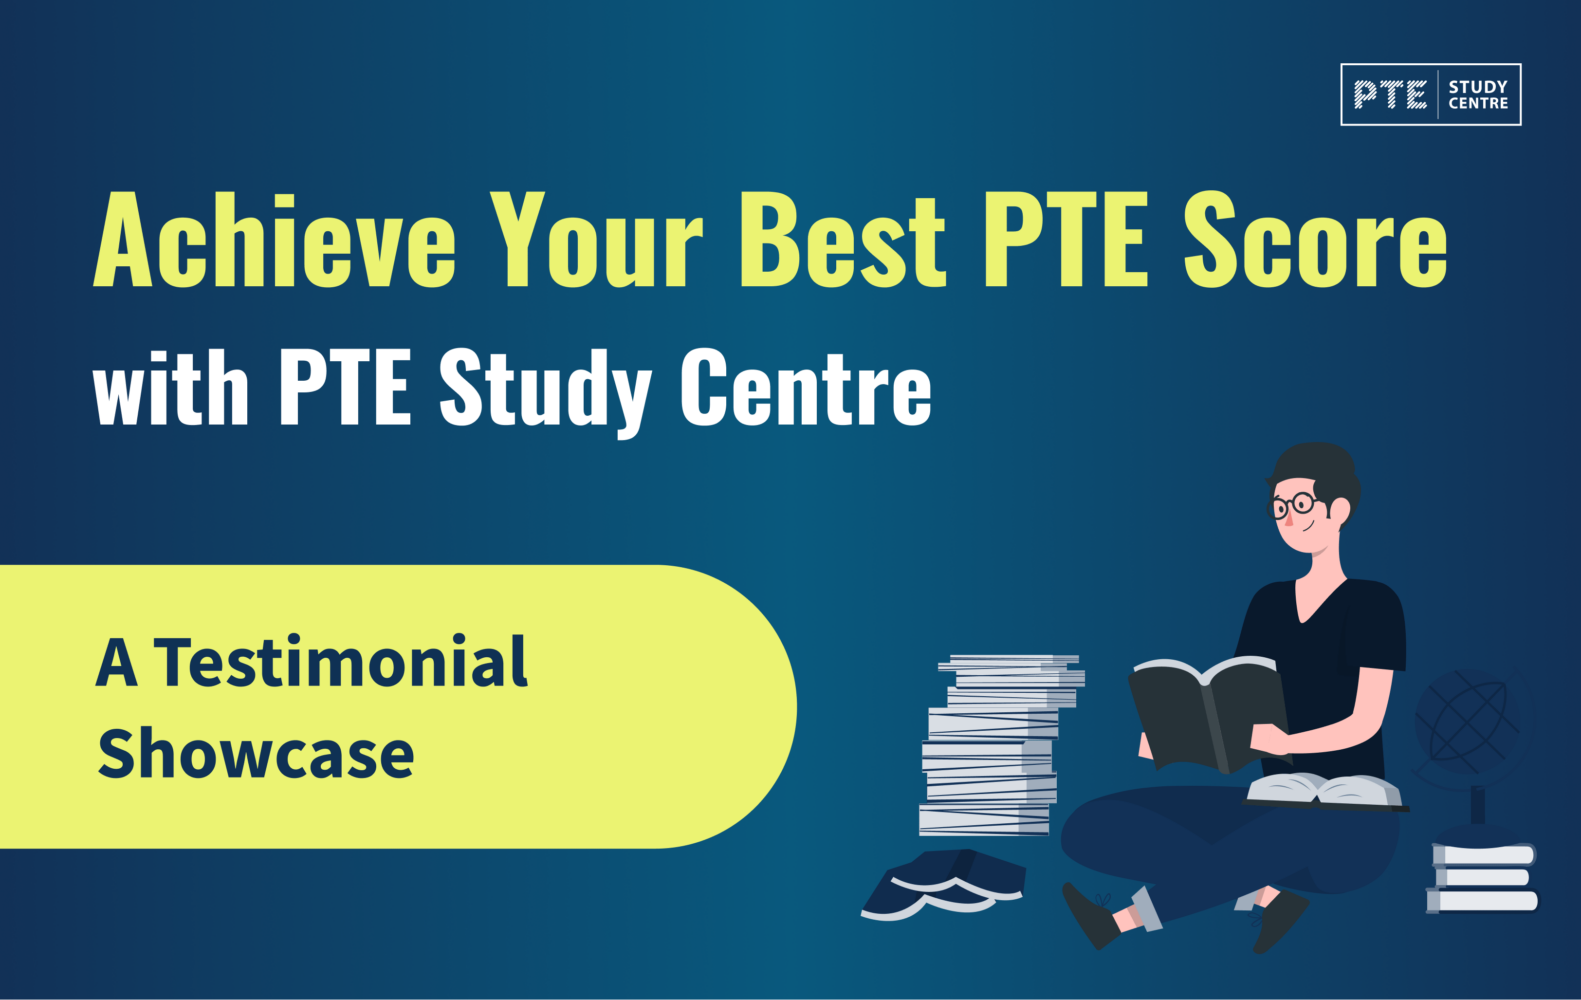 Achieve Your Best PTE Score with PTE Study Centre: A Testimonial Showcase image